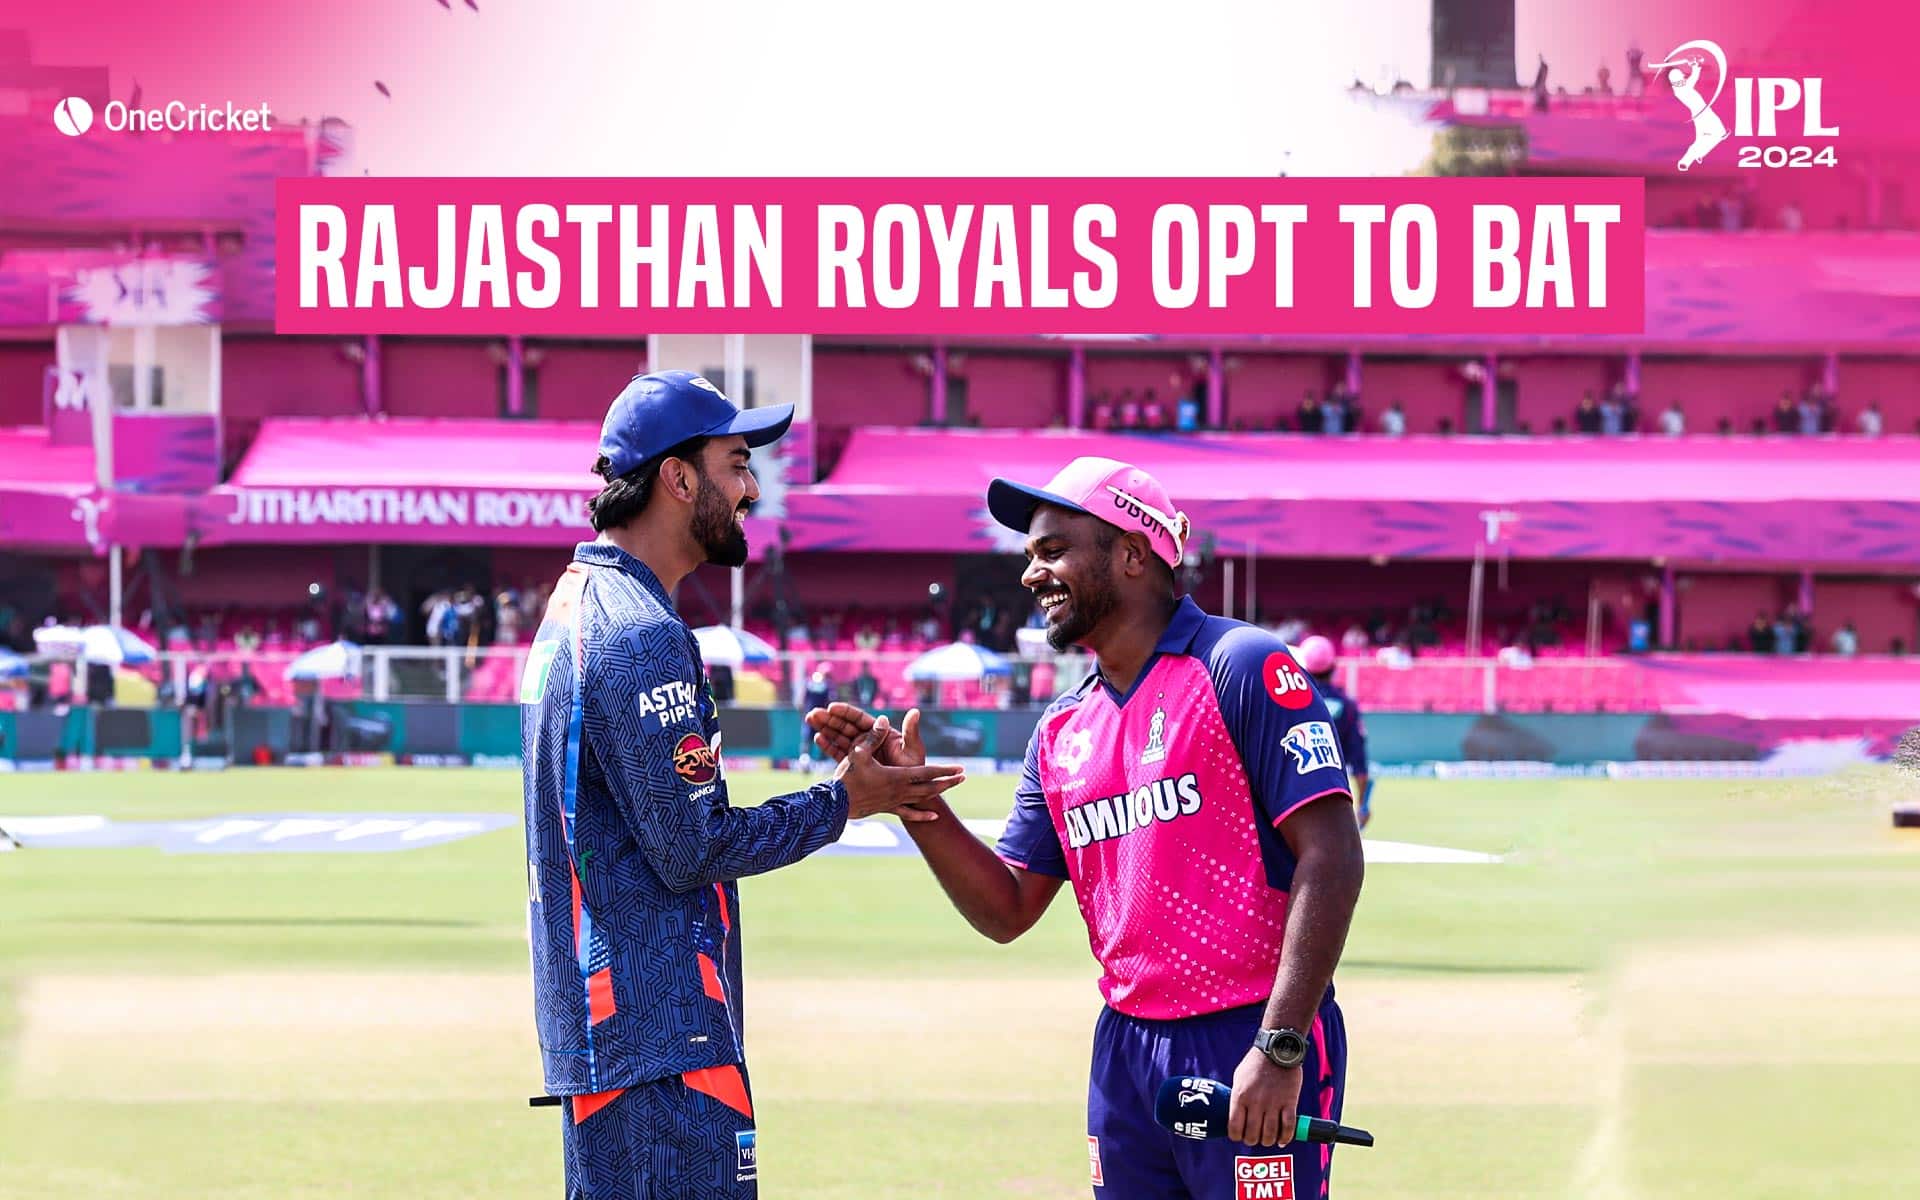 Rajasthan Royals have won the toss and have opted to bat first (Source: OneCricket)